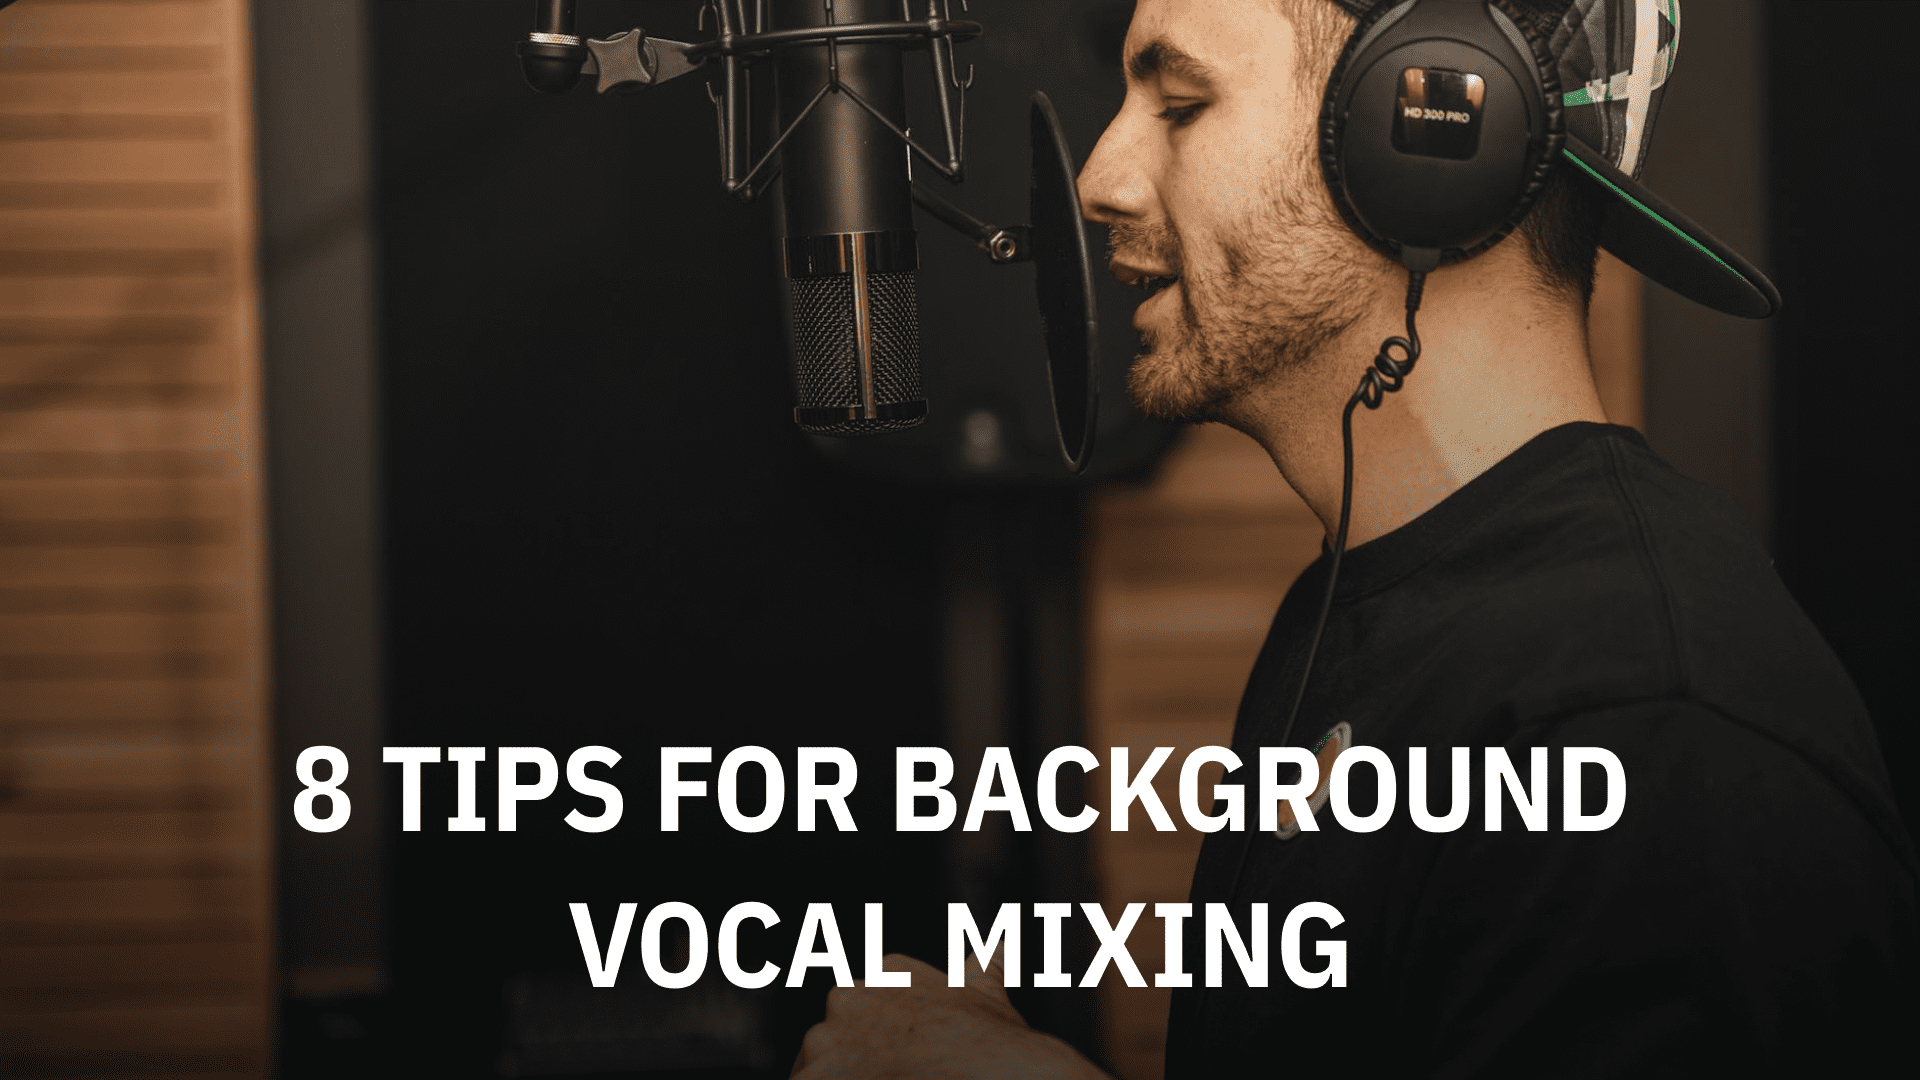 8 Tips for Background Vocal Mixing